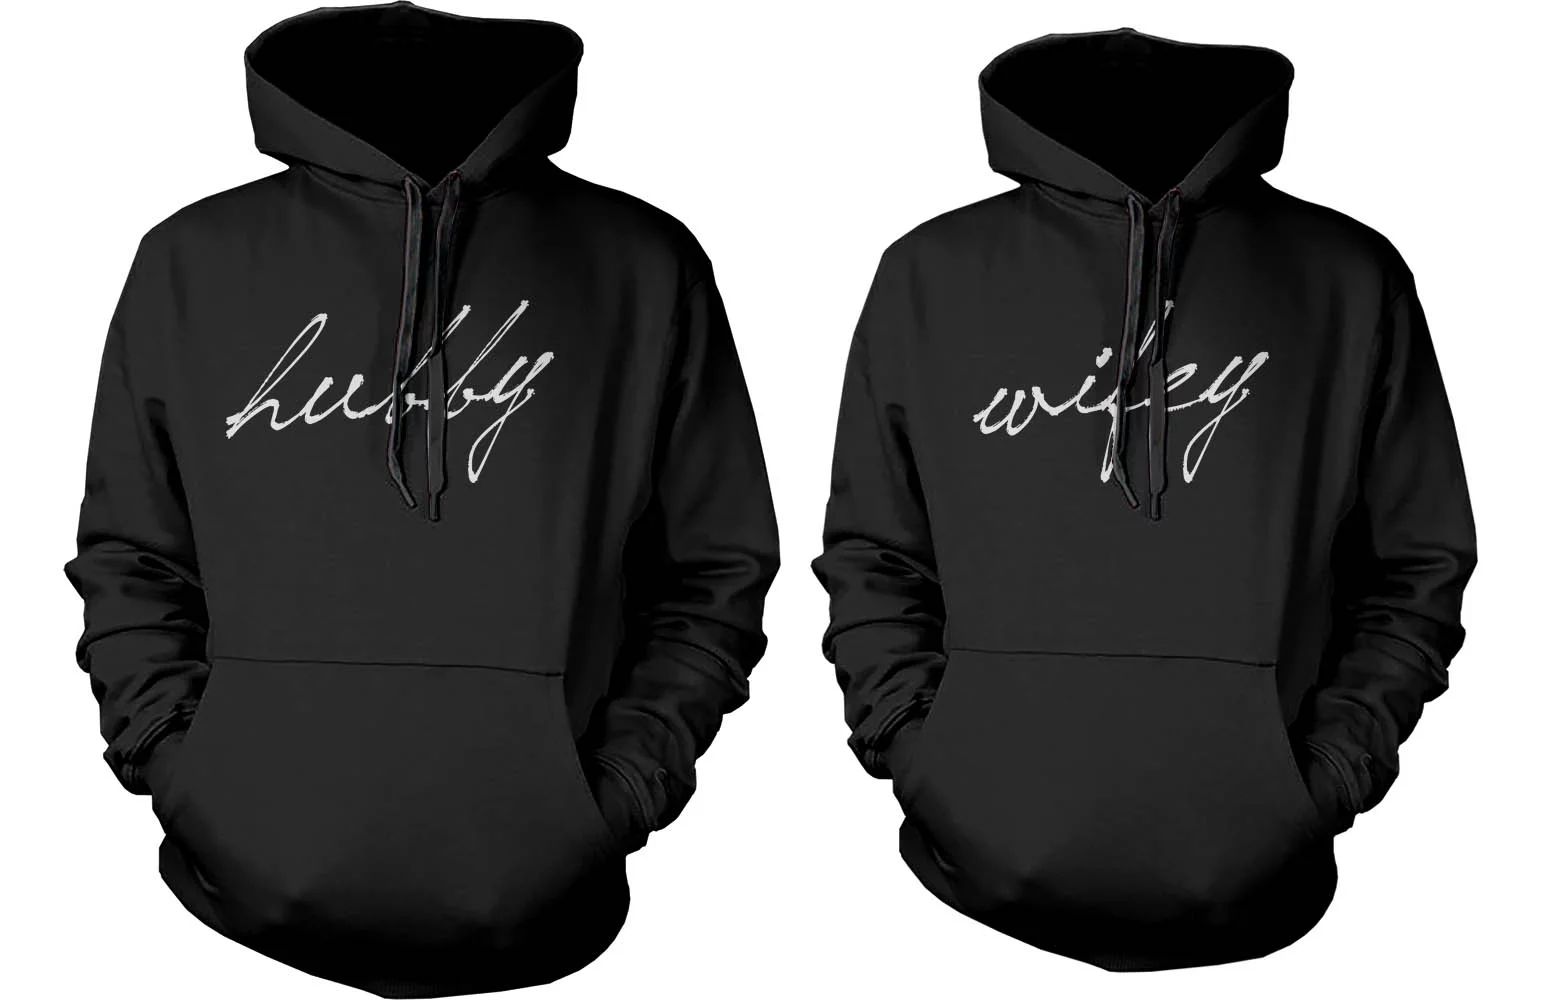 Hubby and Wifey Cute Couple Hoodies Funny Matching Outfit for Couples | Walmart (US)